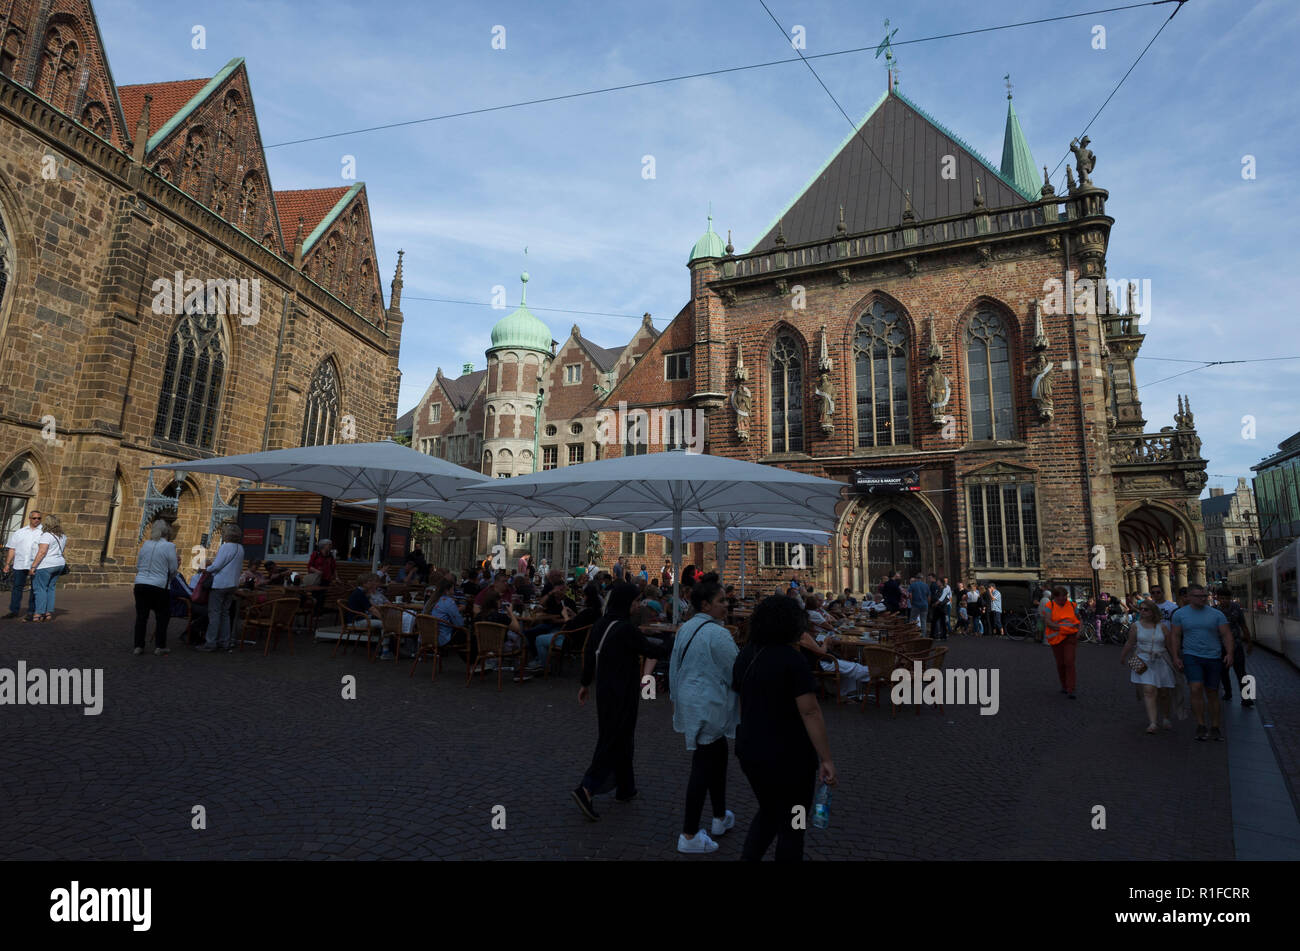 Marktplatz, Bremen. Deutschland Germany.  A scene looking across the market square looking upon an outside area reserved for serving refreshments for drinks and light meals.  Many people are enjoying refreshments while others walk by.  Large parasols protect them from the elements whether that's rain or strong sunshine although it's currently under shade. Stock Photo